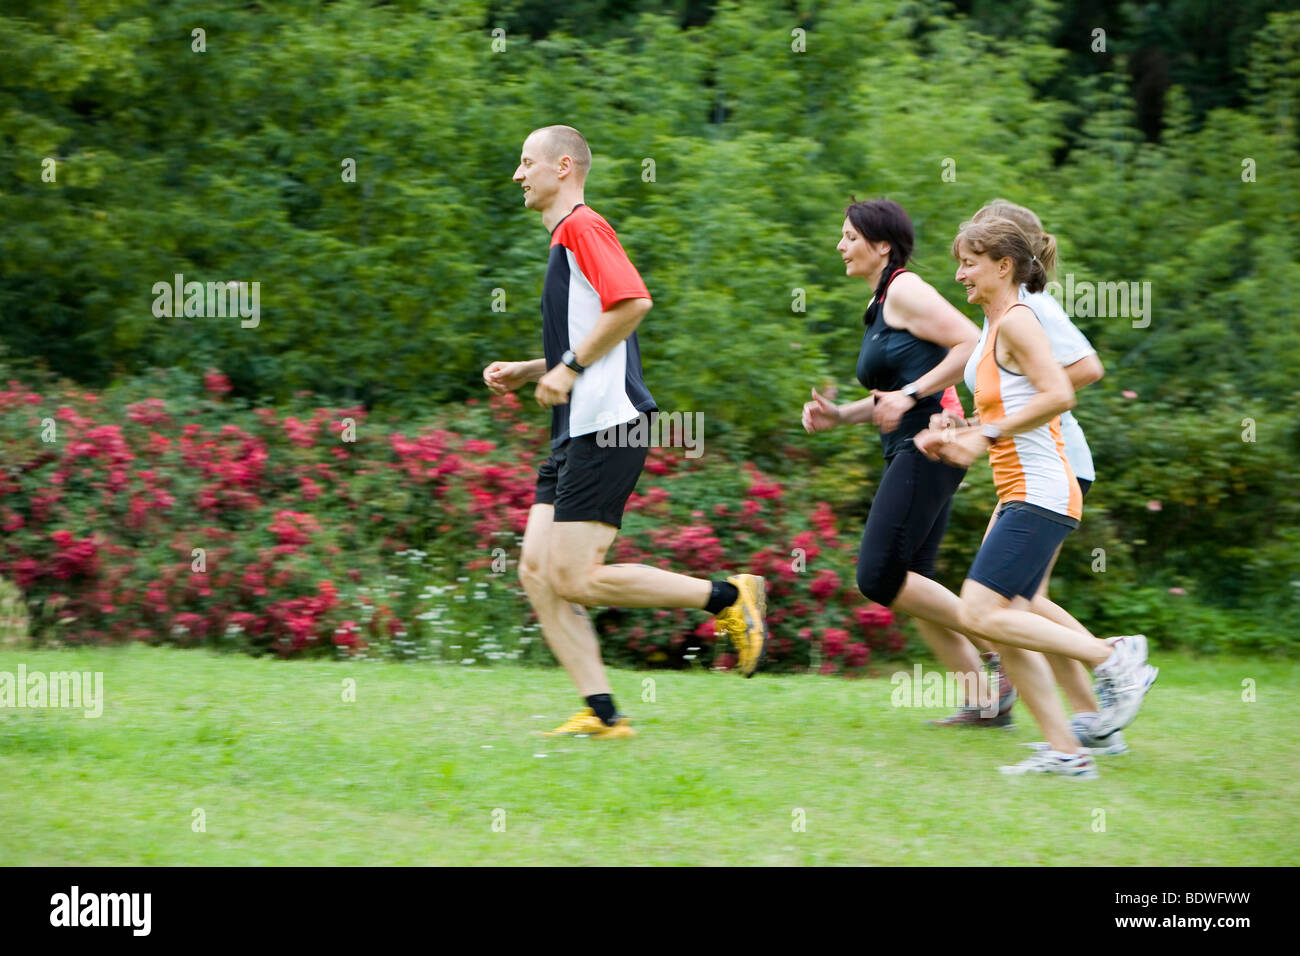 Personal trainer and three women, sprinting outdoors Stock Photo